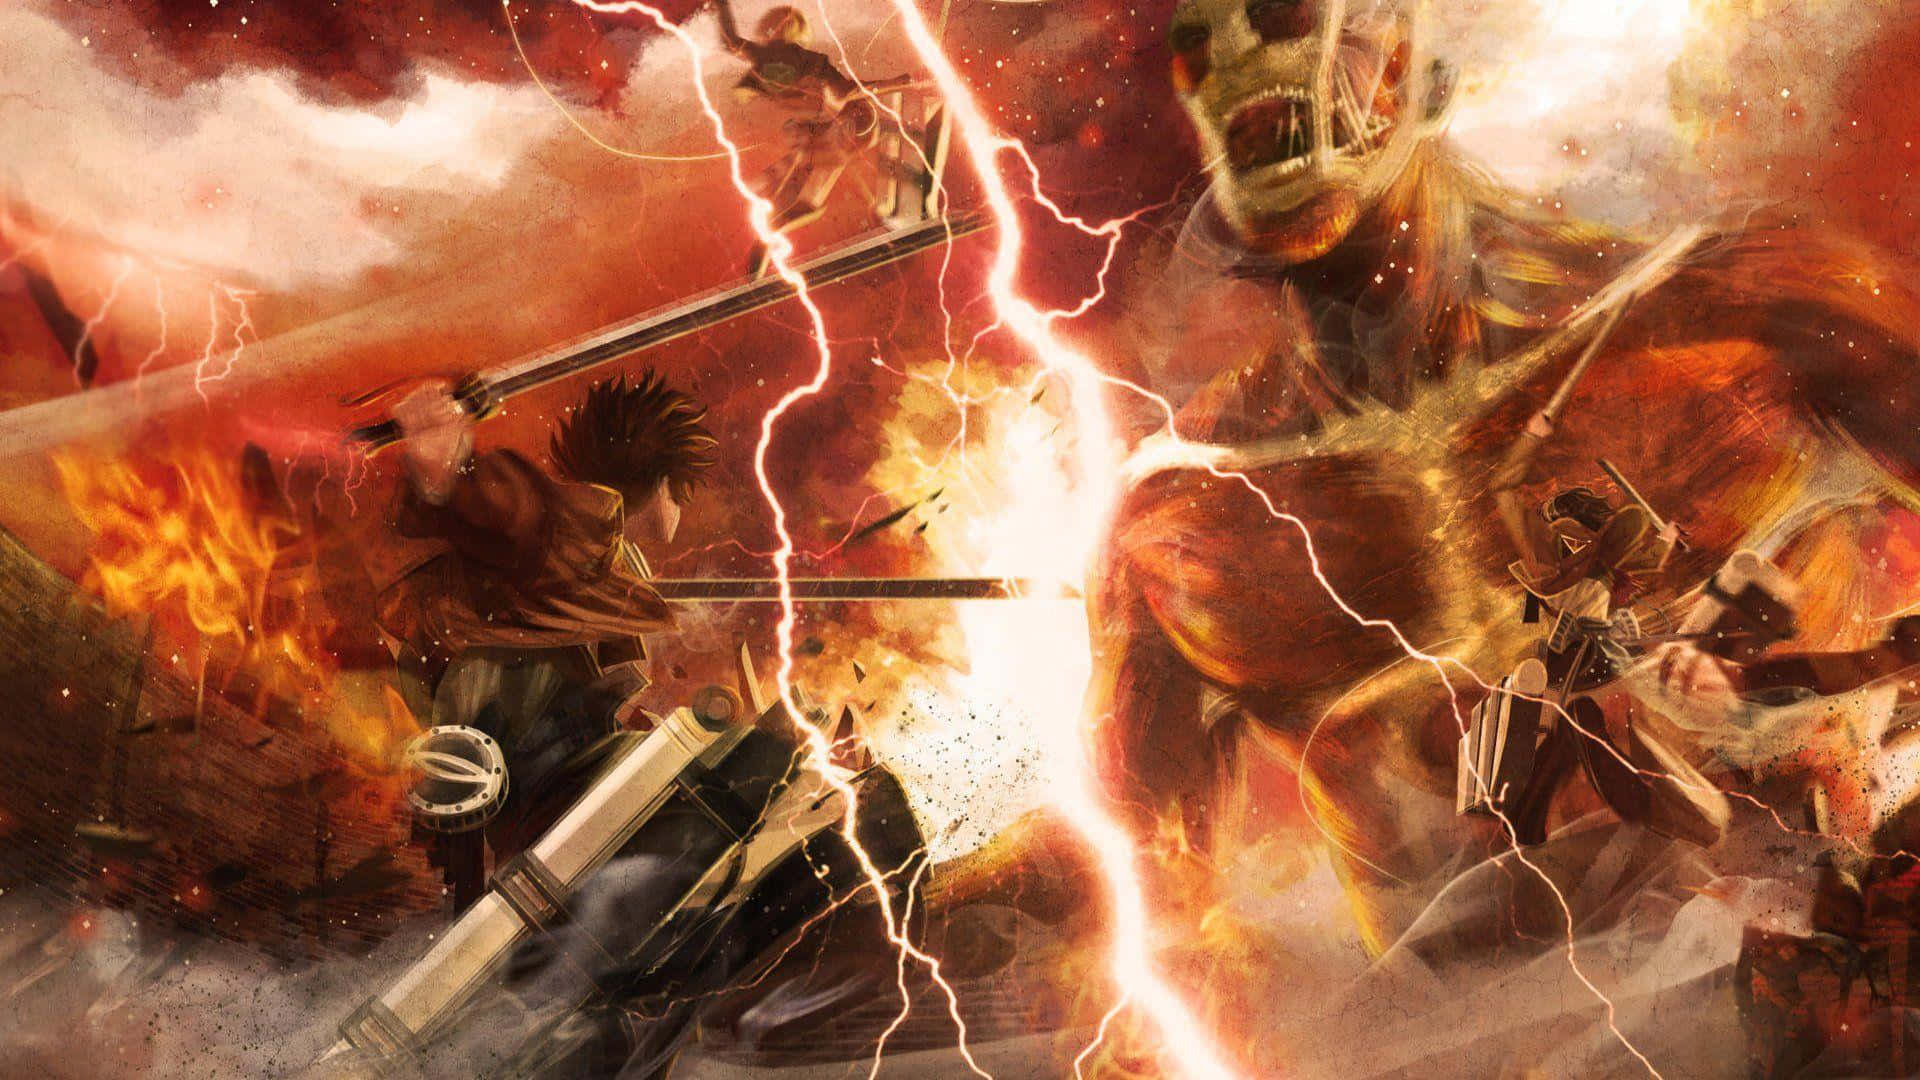 Slay titans with finesse in the Attack On Titan video game. Wallpaper